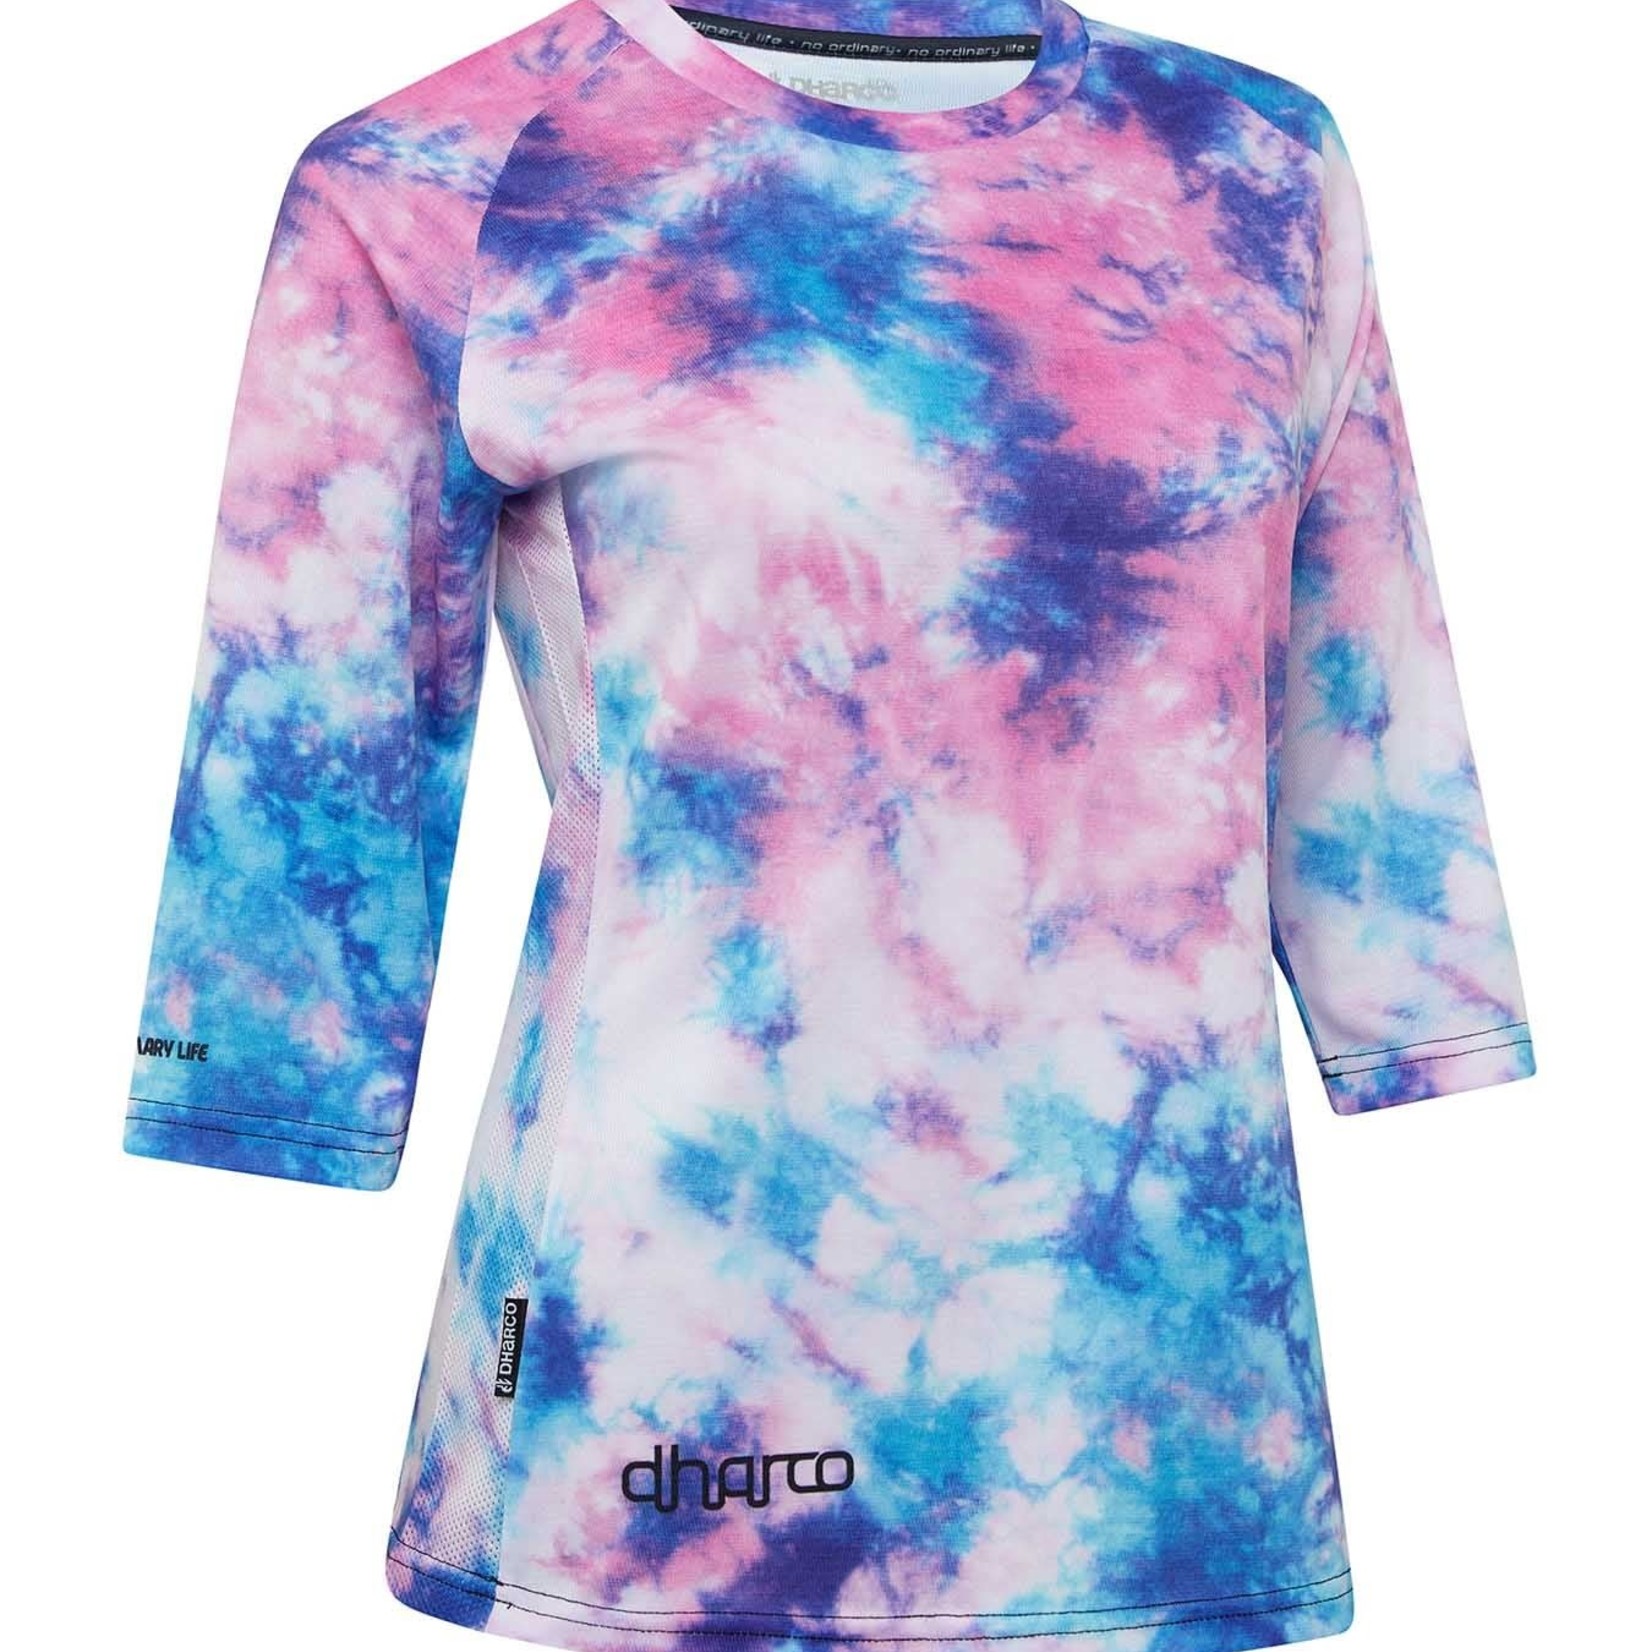 DHaRCO DHaRCO Womens 3/4 Sleeve Jersey Tie Dye XS